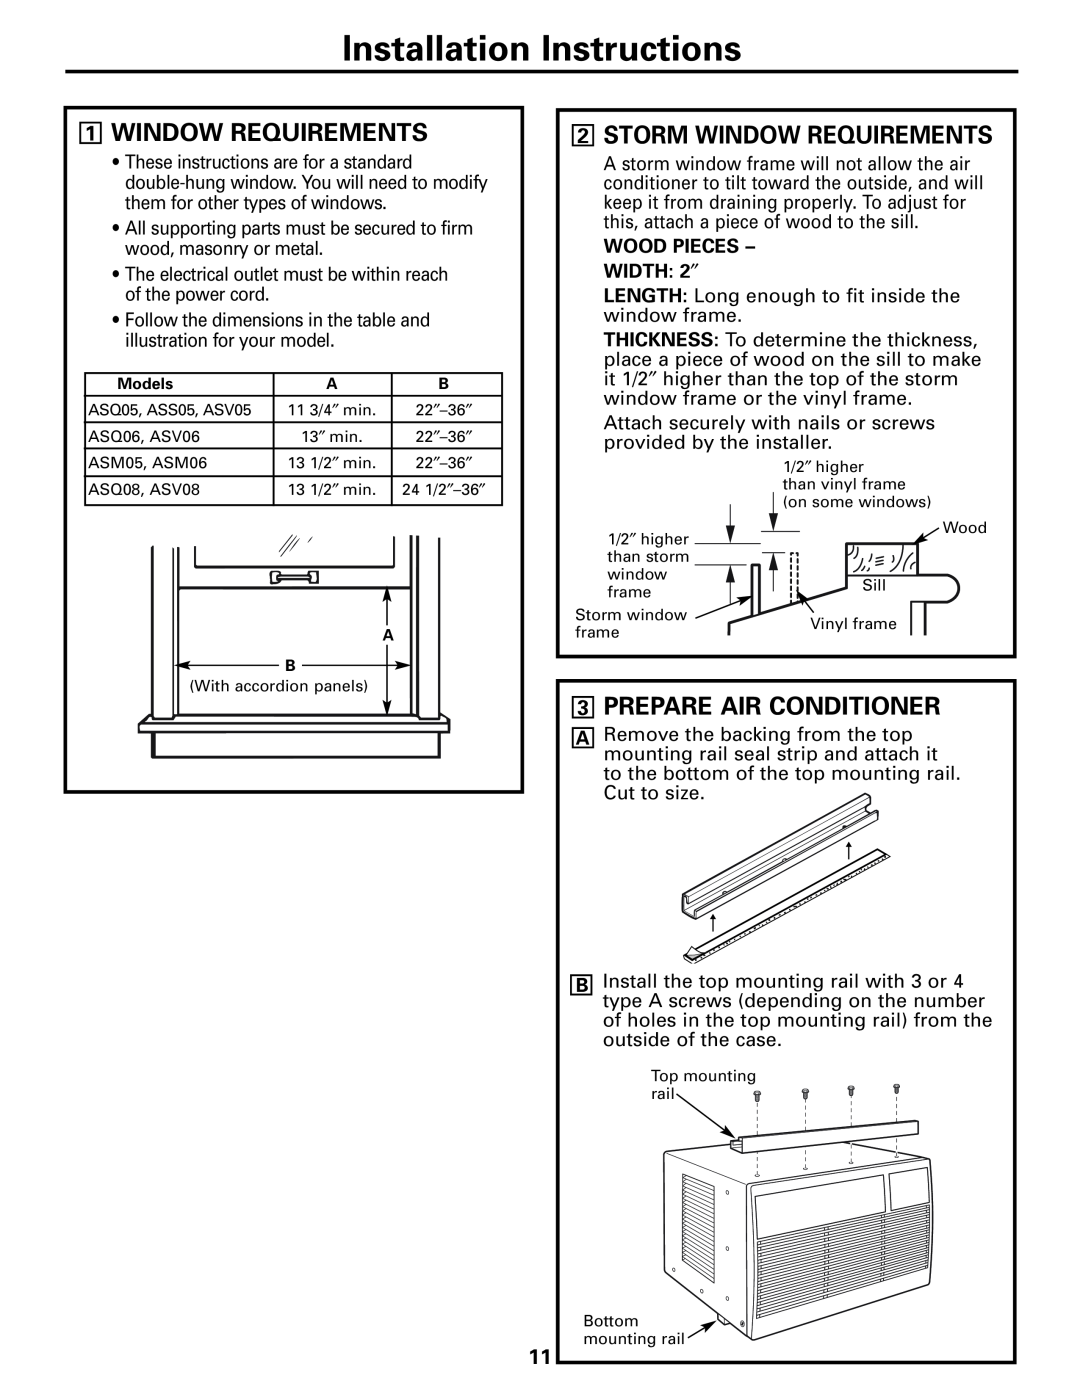 GE ASM06* Installation Instructions, 1WINDOW REQUIREMENTS, 2STORM WINDOW REQUIREMENTS, 3PREPARE AIR CONDITIONER 